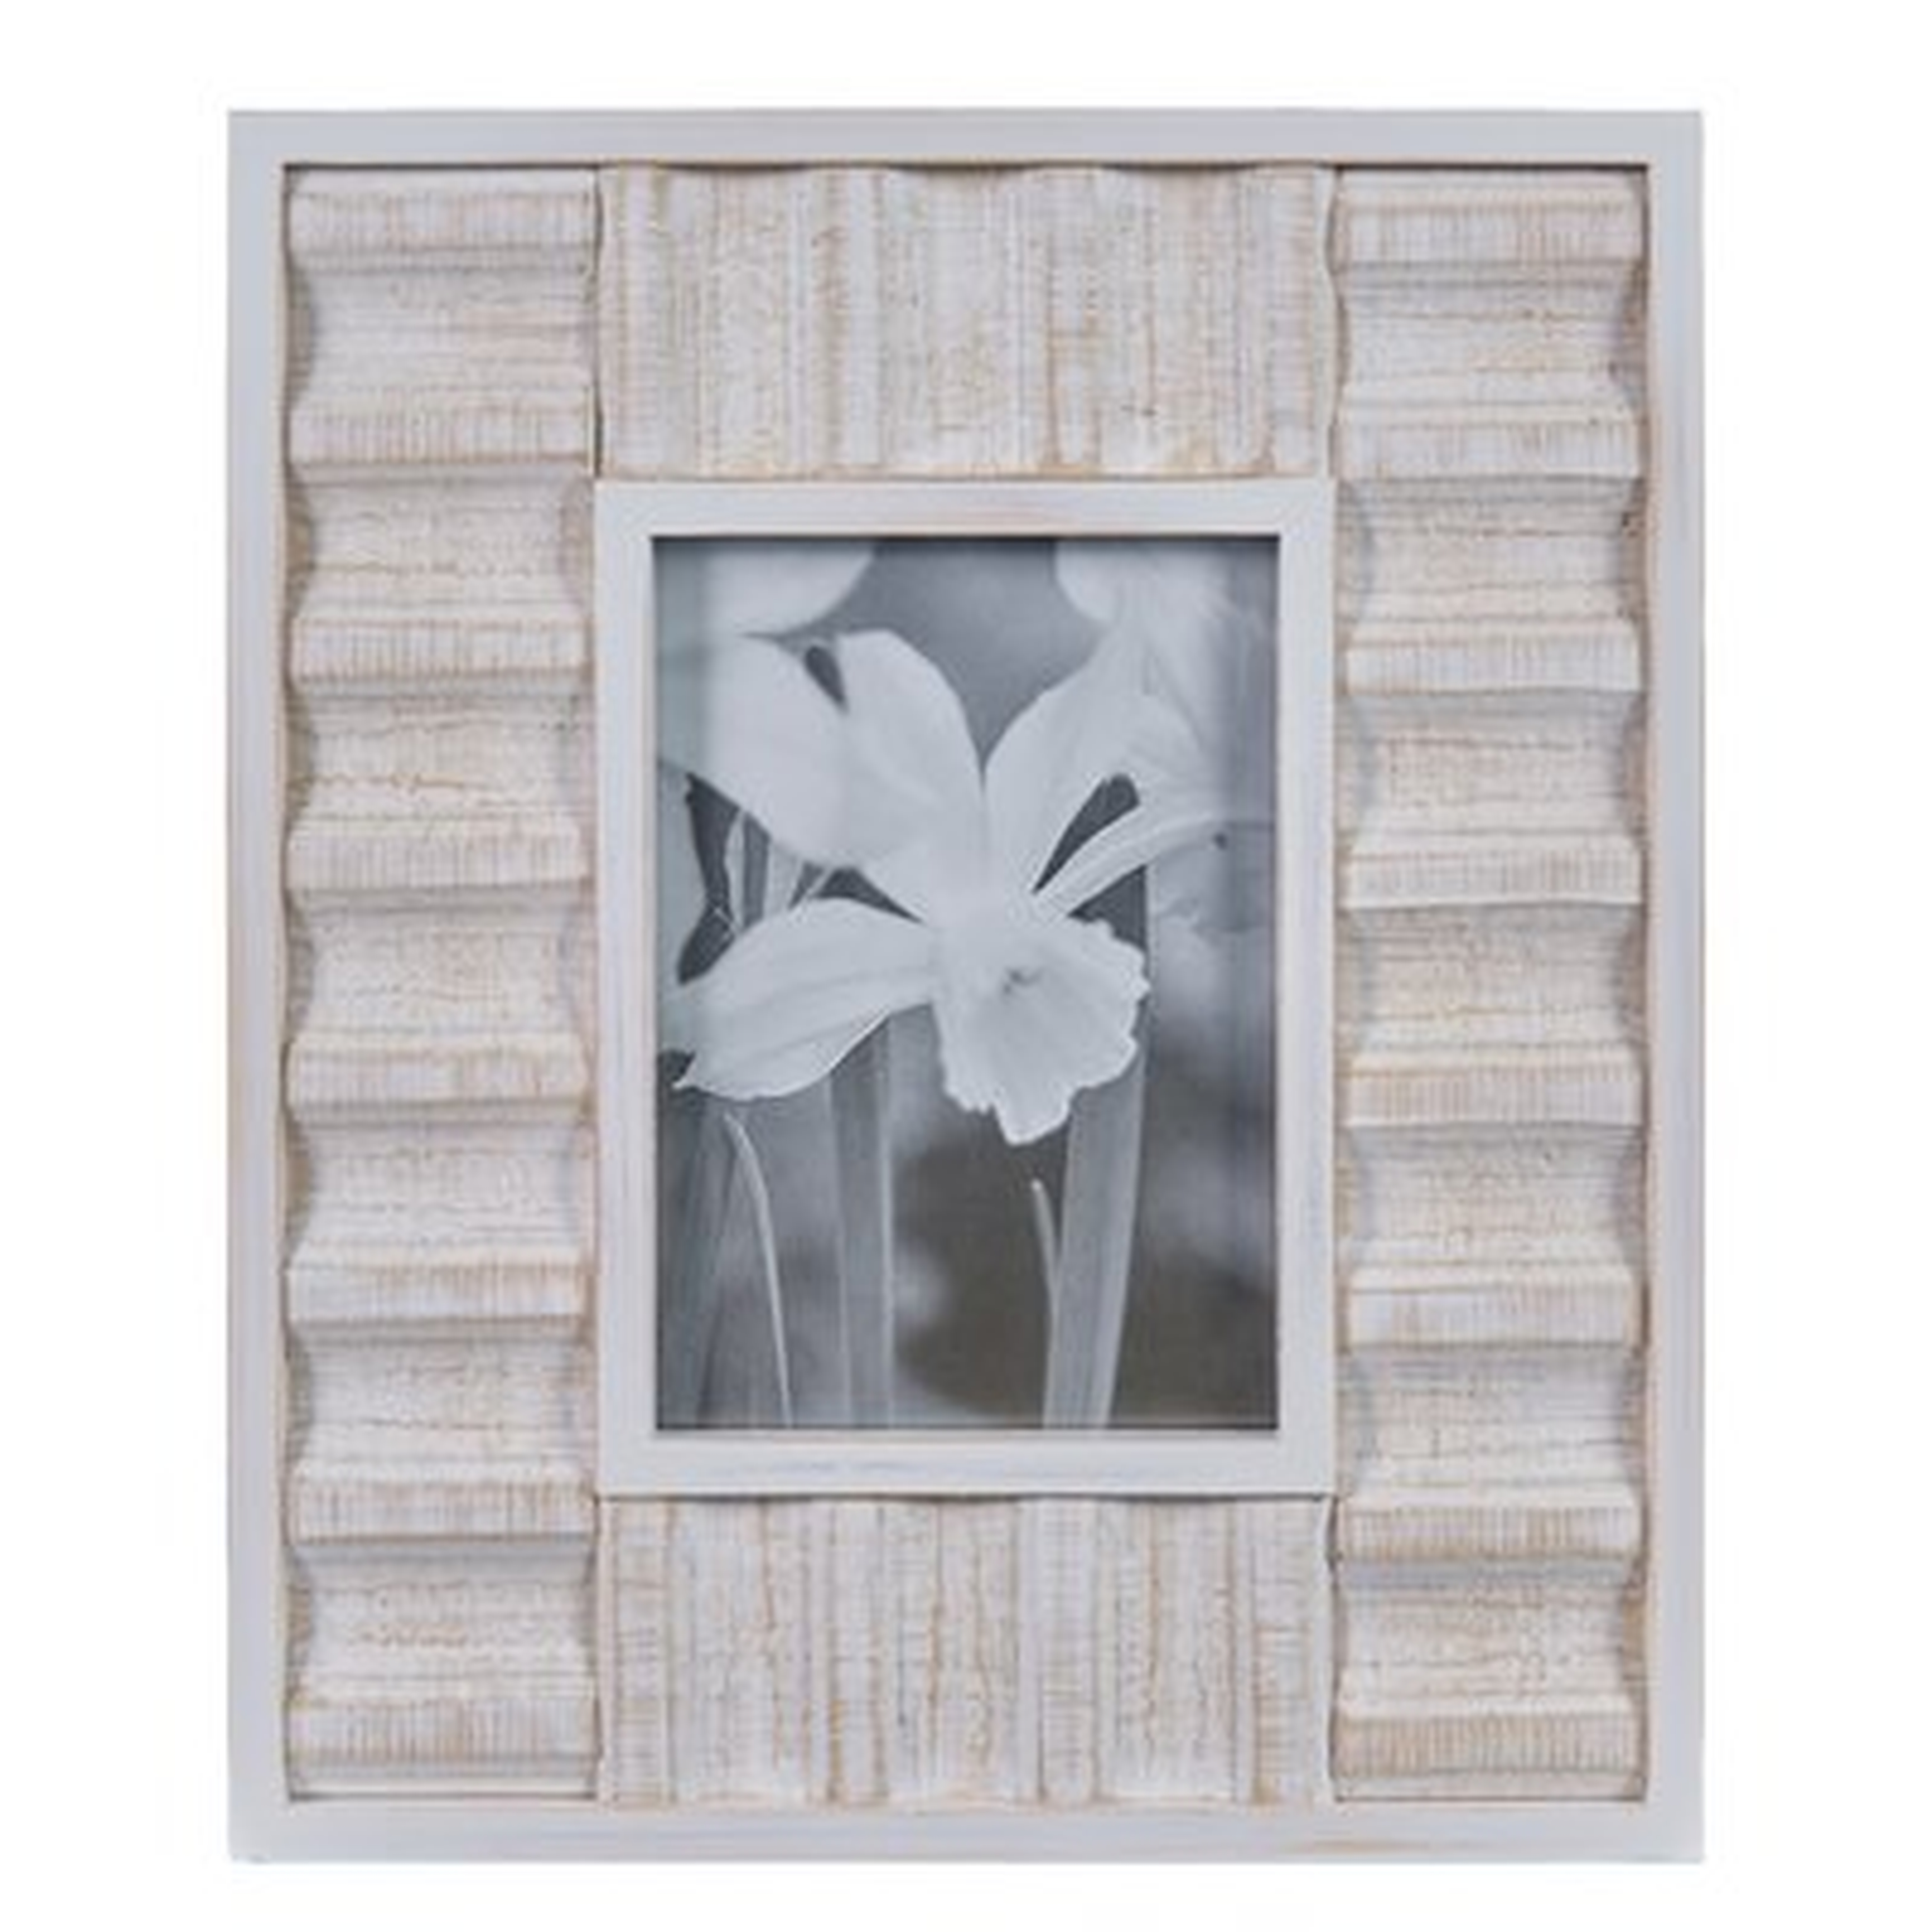 Finnell Carved Wood Tabletop Display Picture Frame - Birch Lane